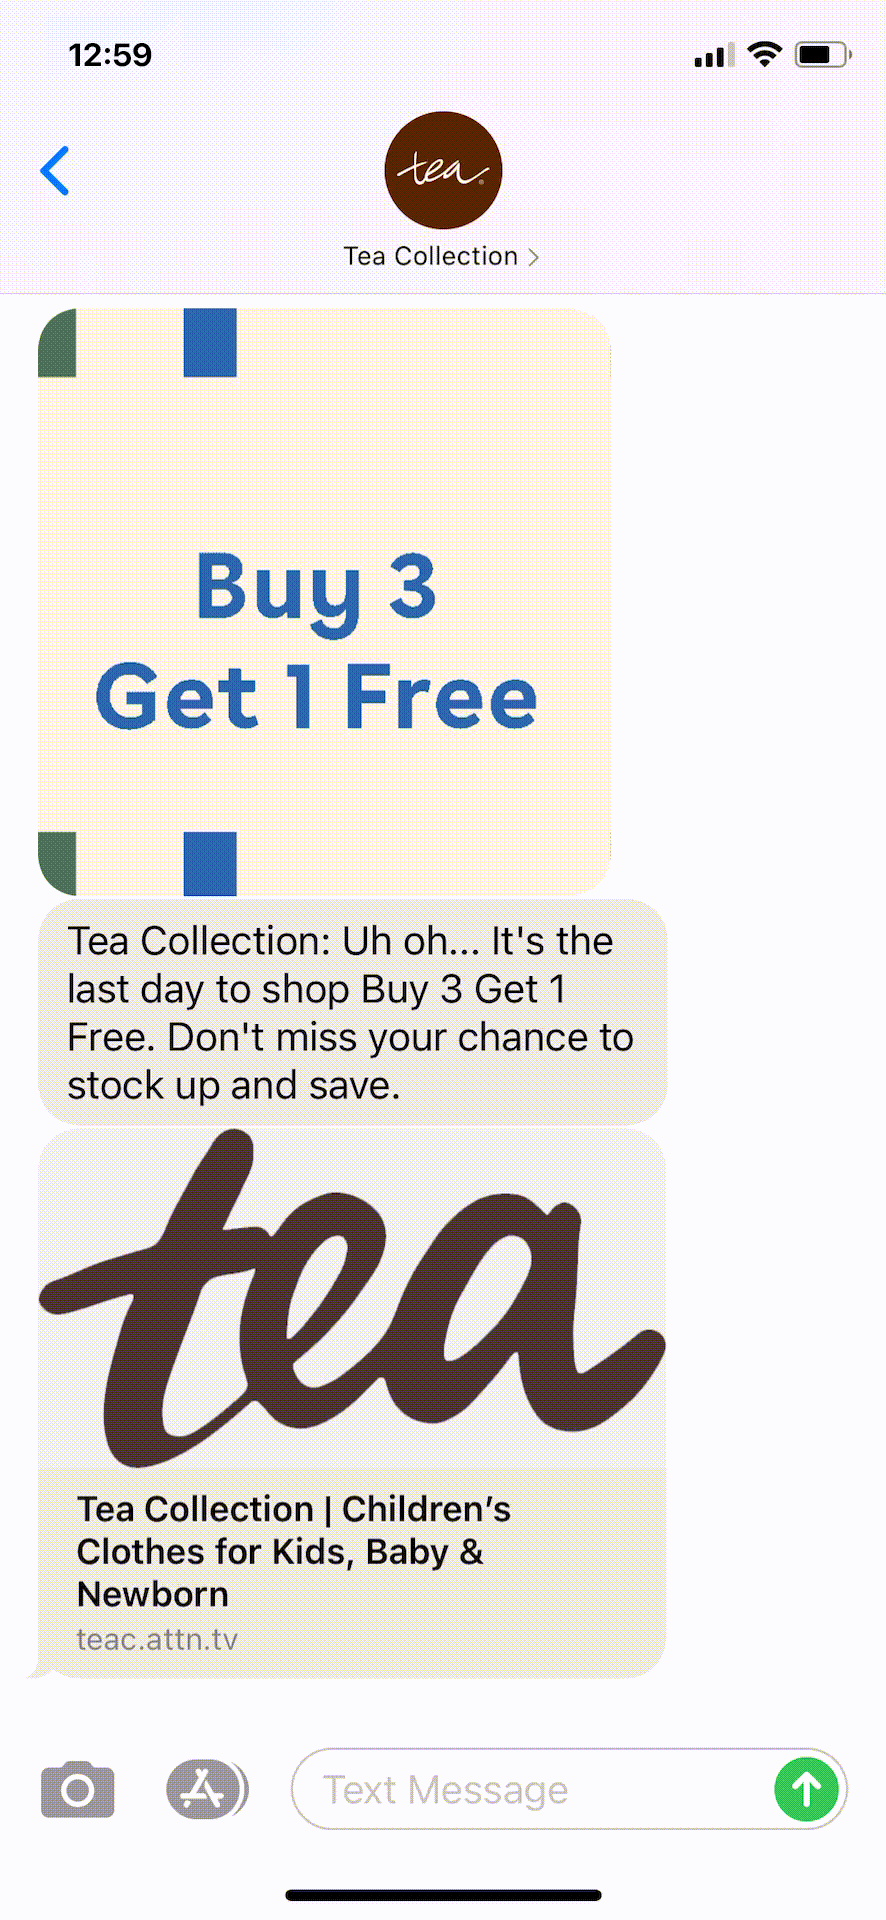 Tea-Collection-Text-Message-Marketing-Example-03.07.2021_1